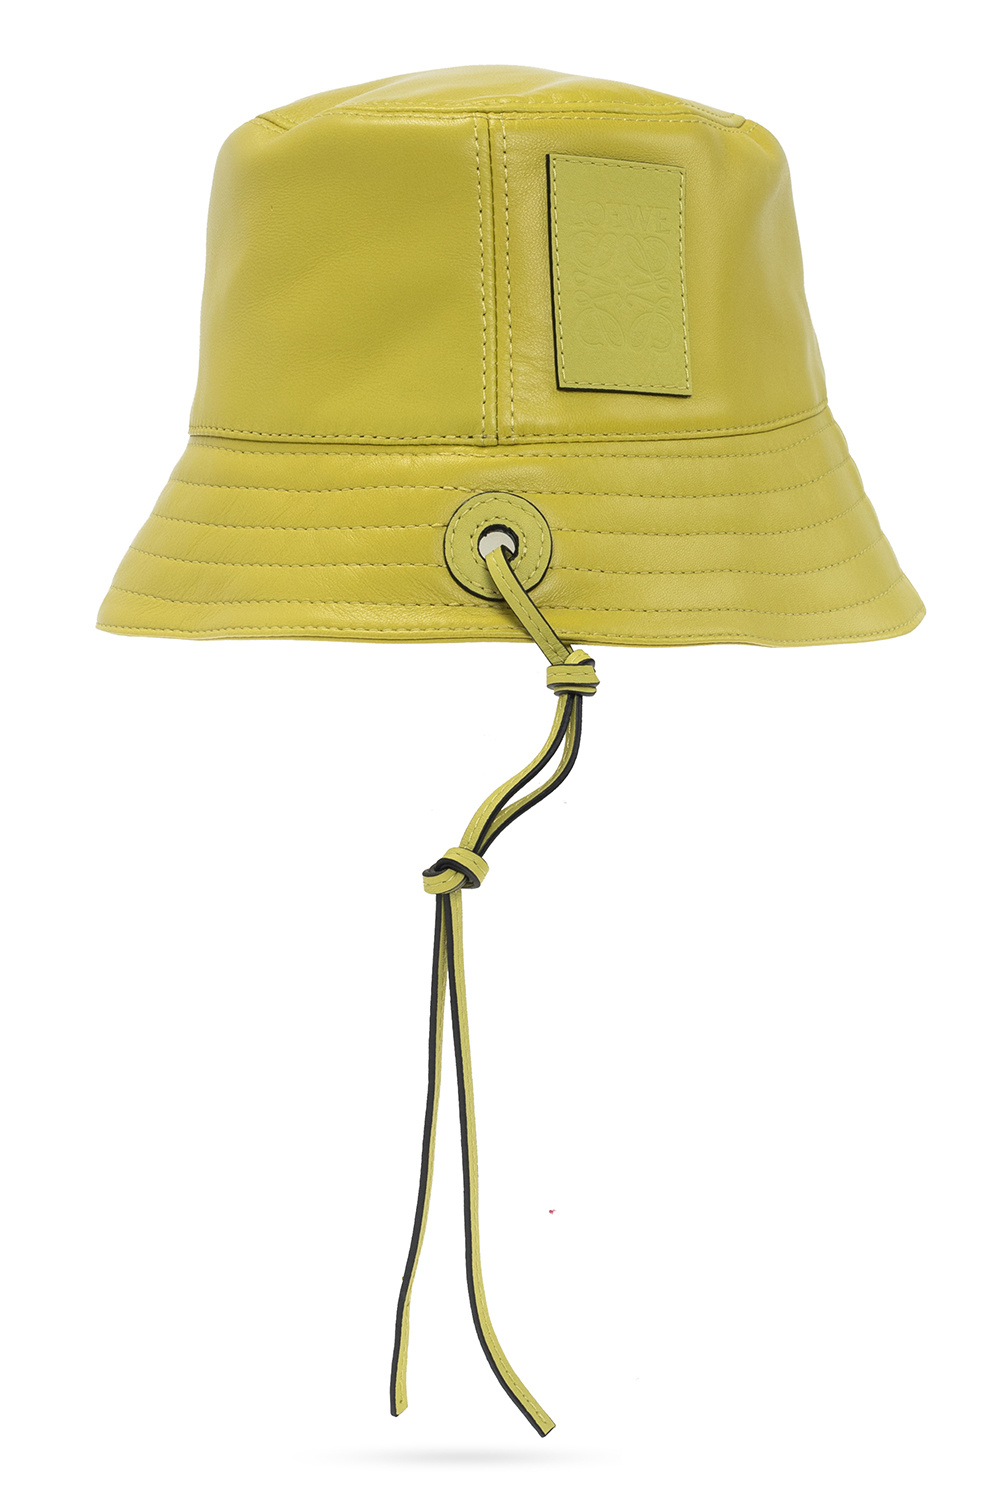 Louis Vuitton Leather Bucket Hat - Yellow Hats, Accessories - LOU772581